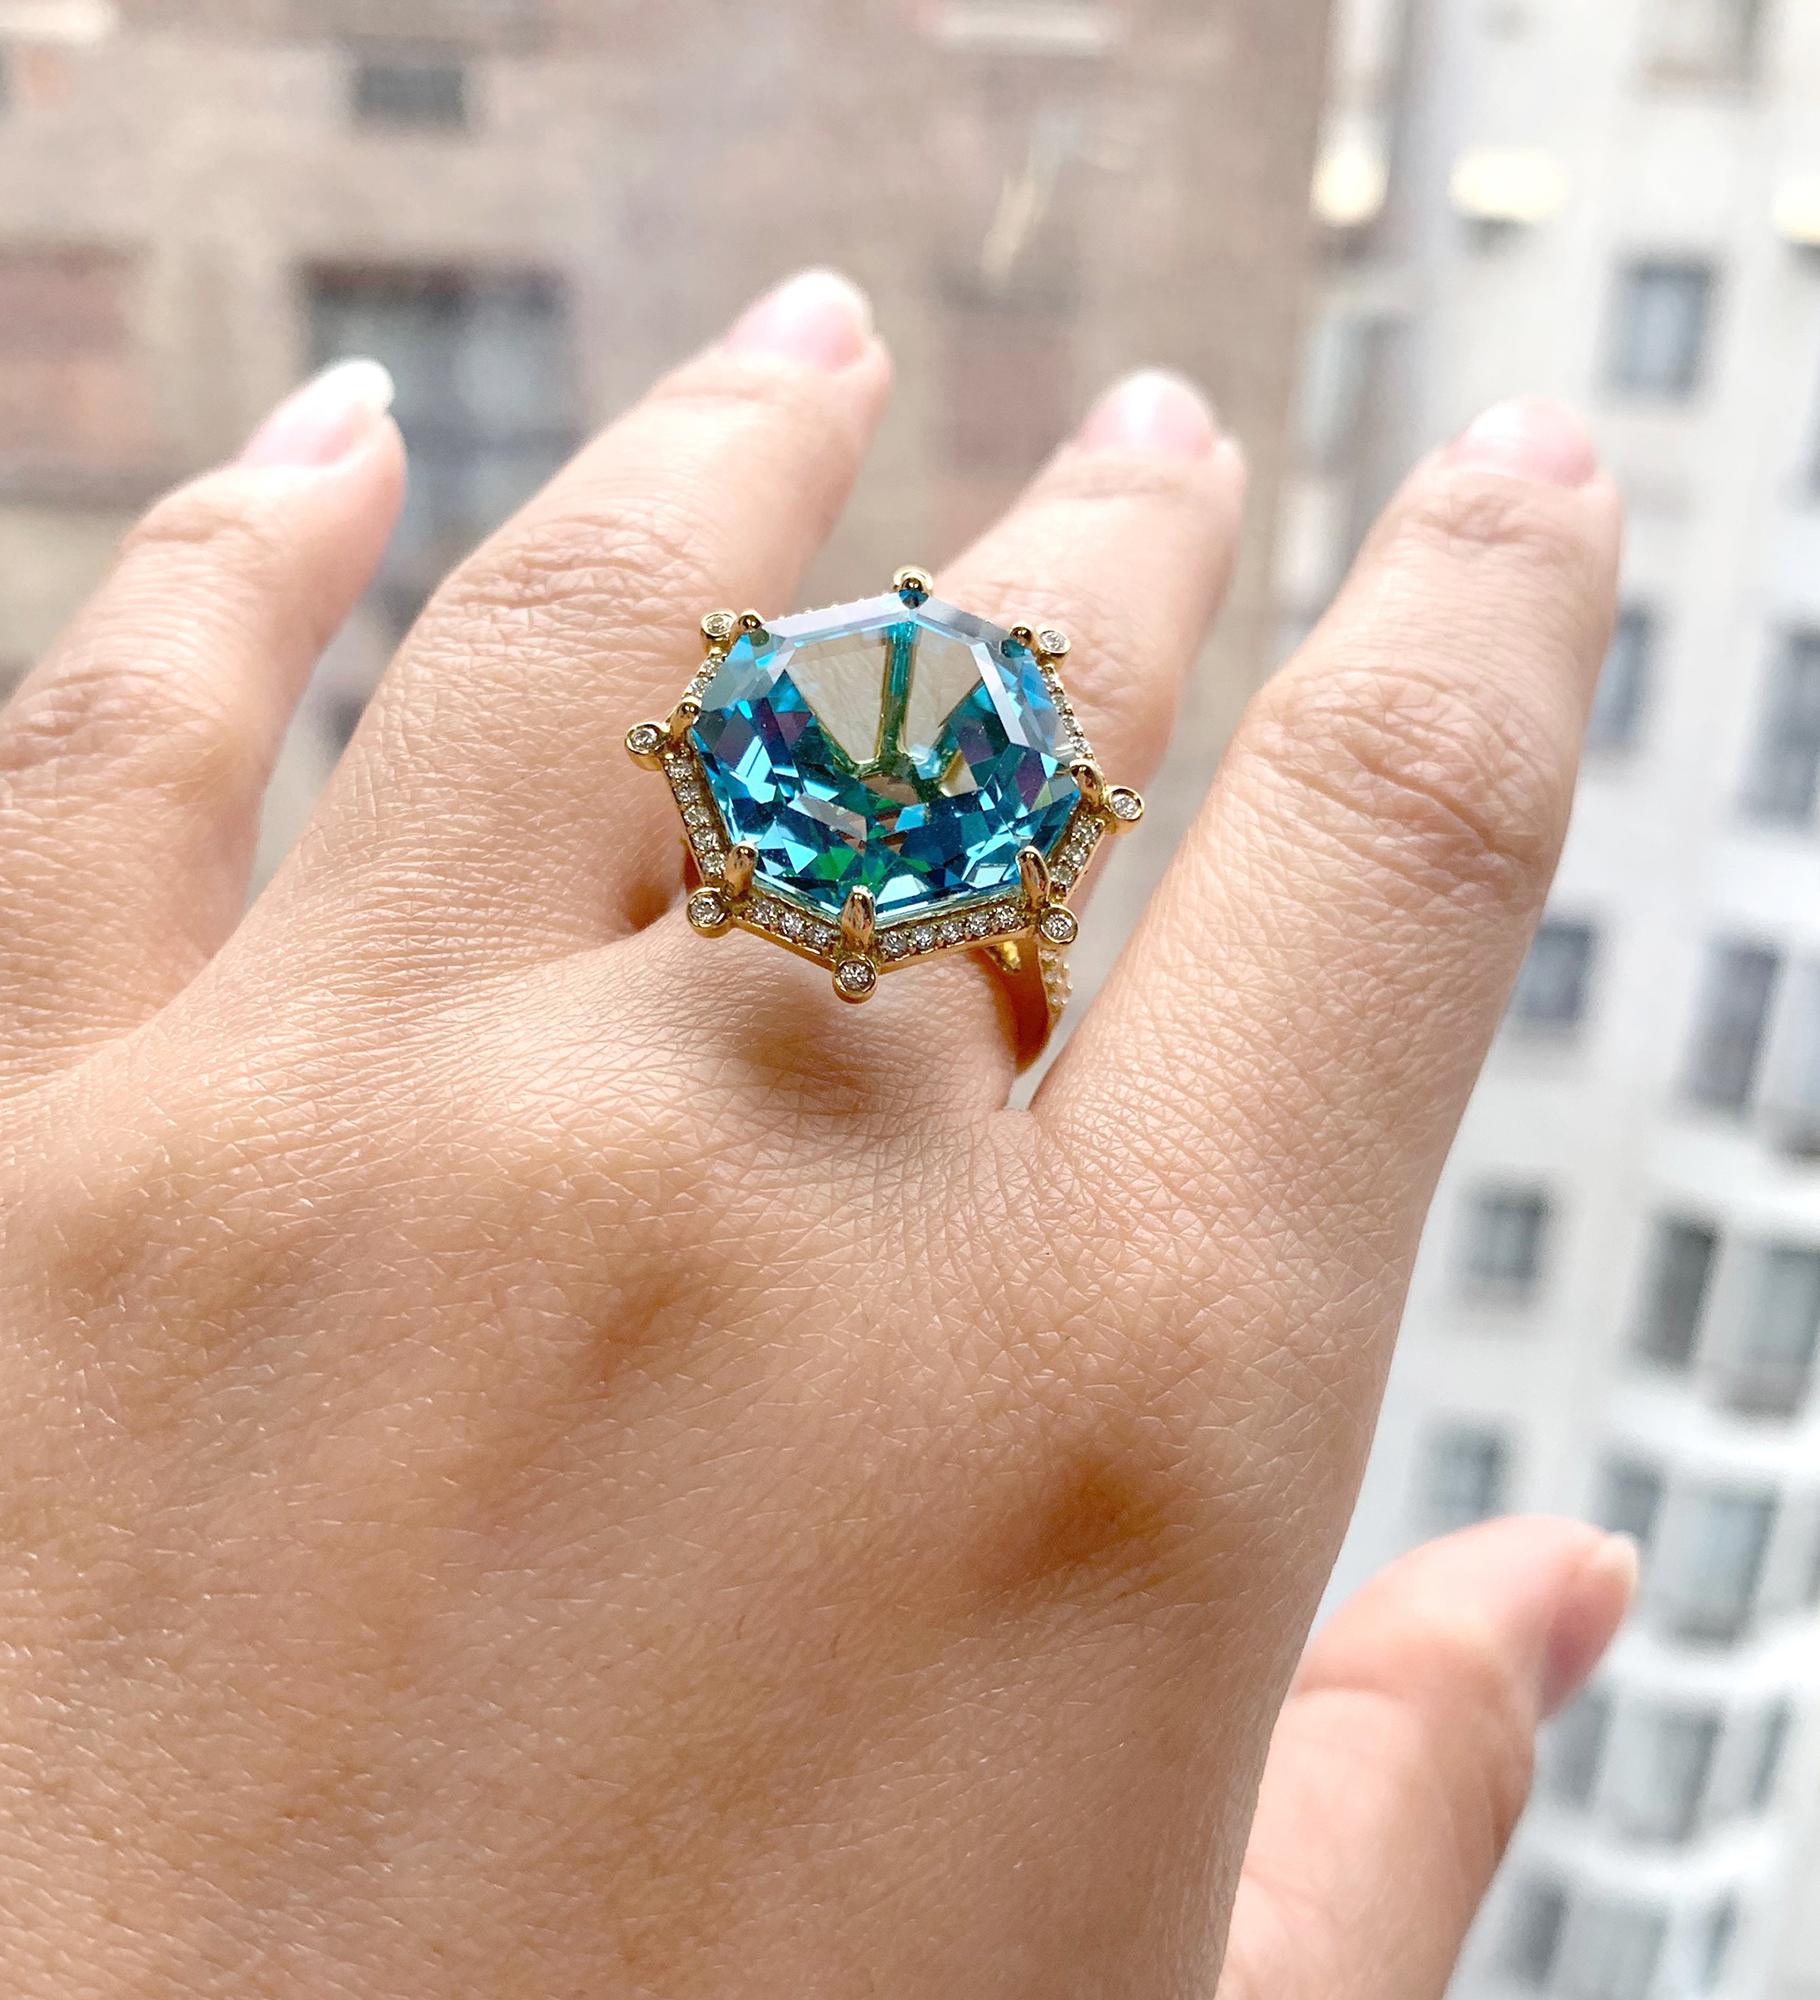 Blue Topaz Large Octagon Ring with Diamonds in 18K Yellow Gold with Diamonds, from 'Gossip' Collection. Like any good piece of gossip, this collection carries a hint of shock value. They will have everyone in suspense about what Goshwara will do